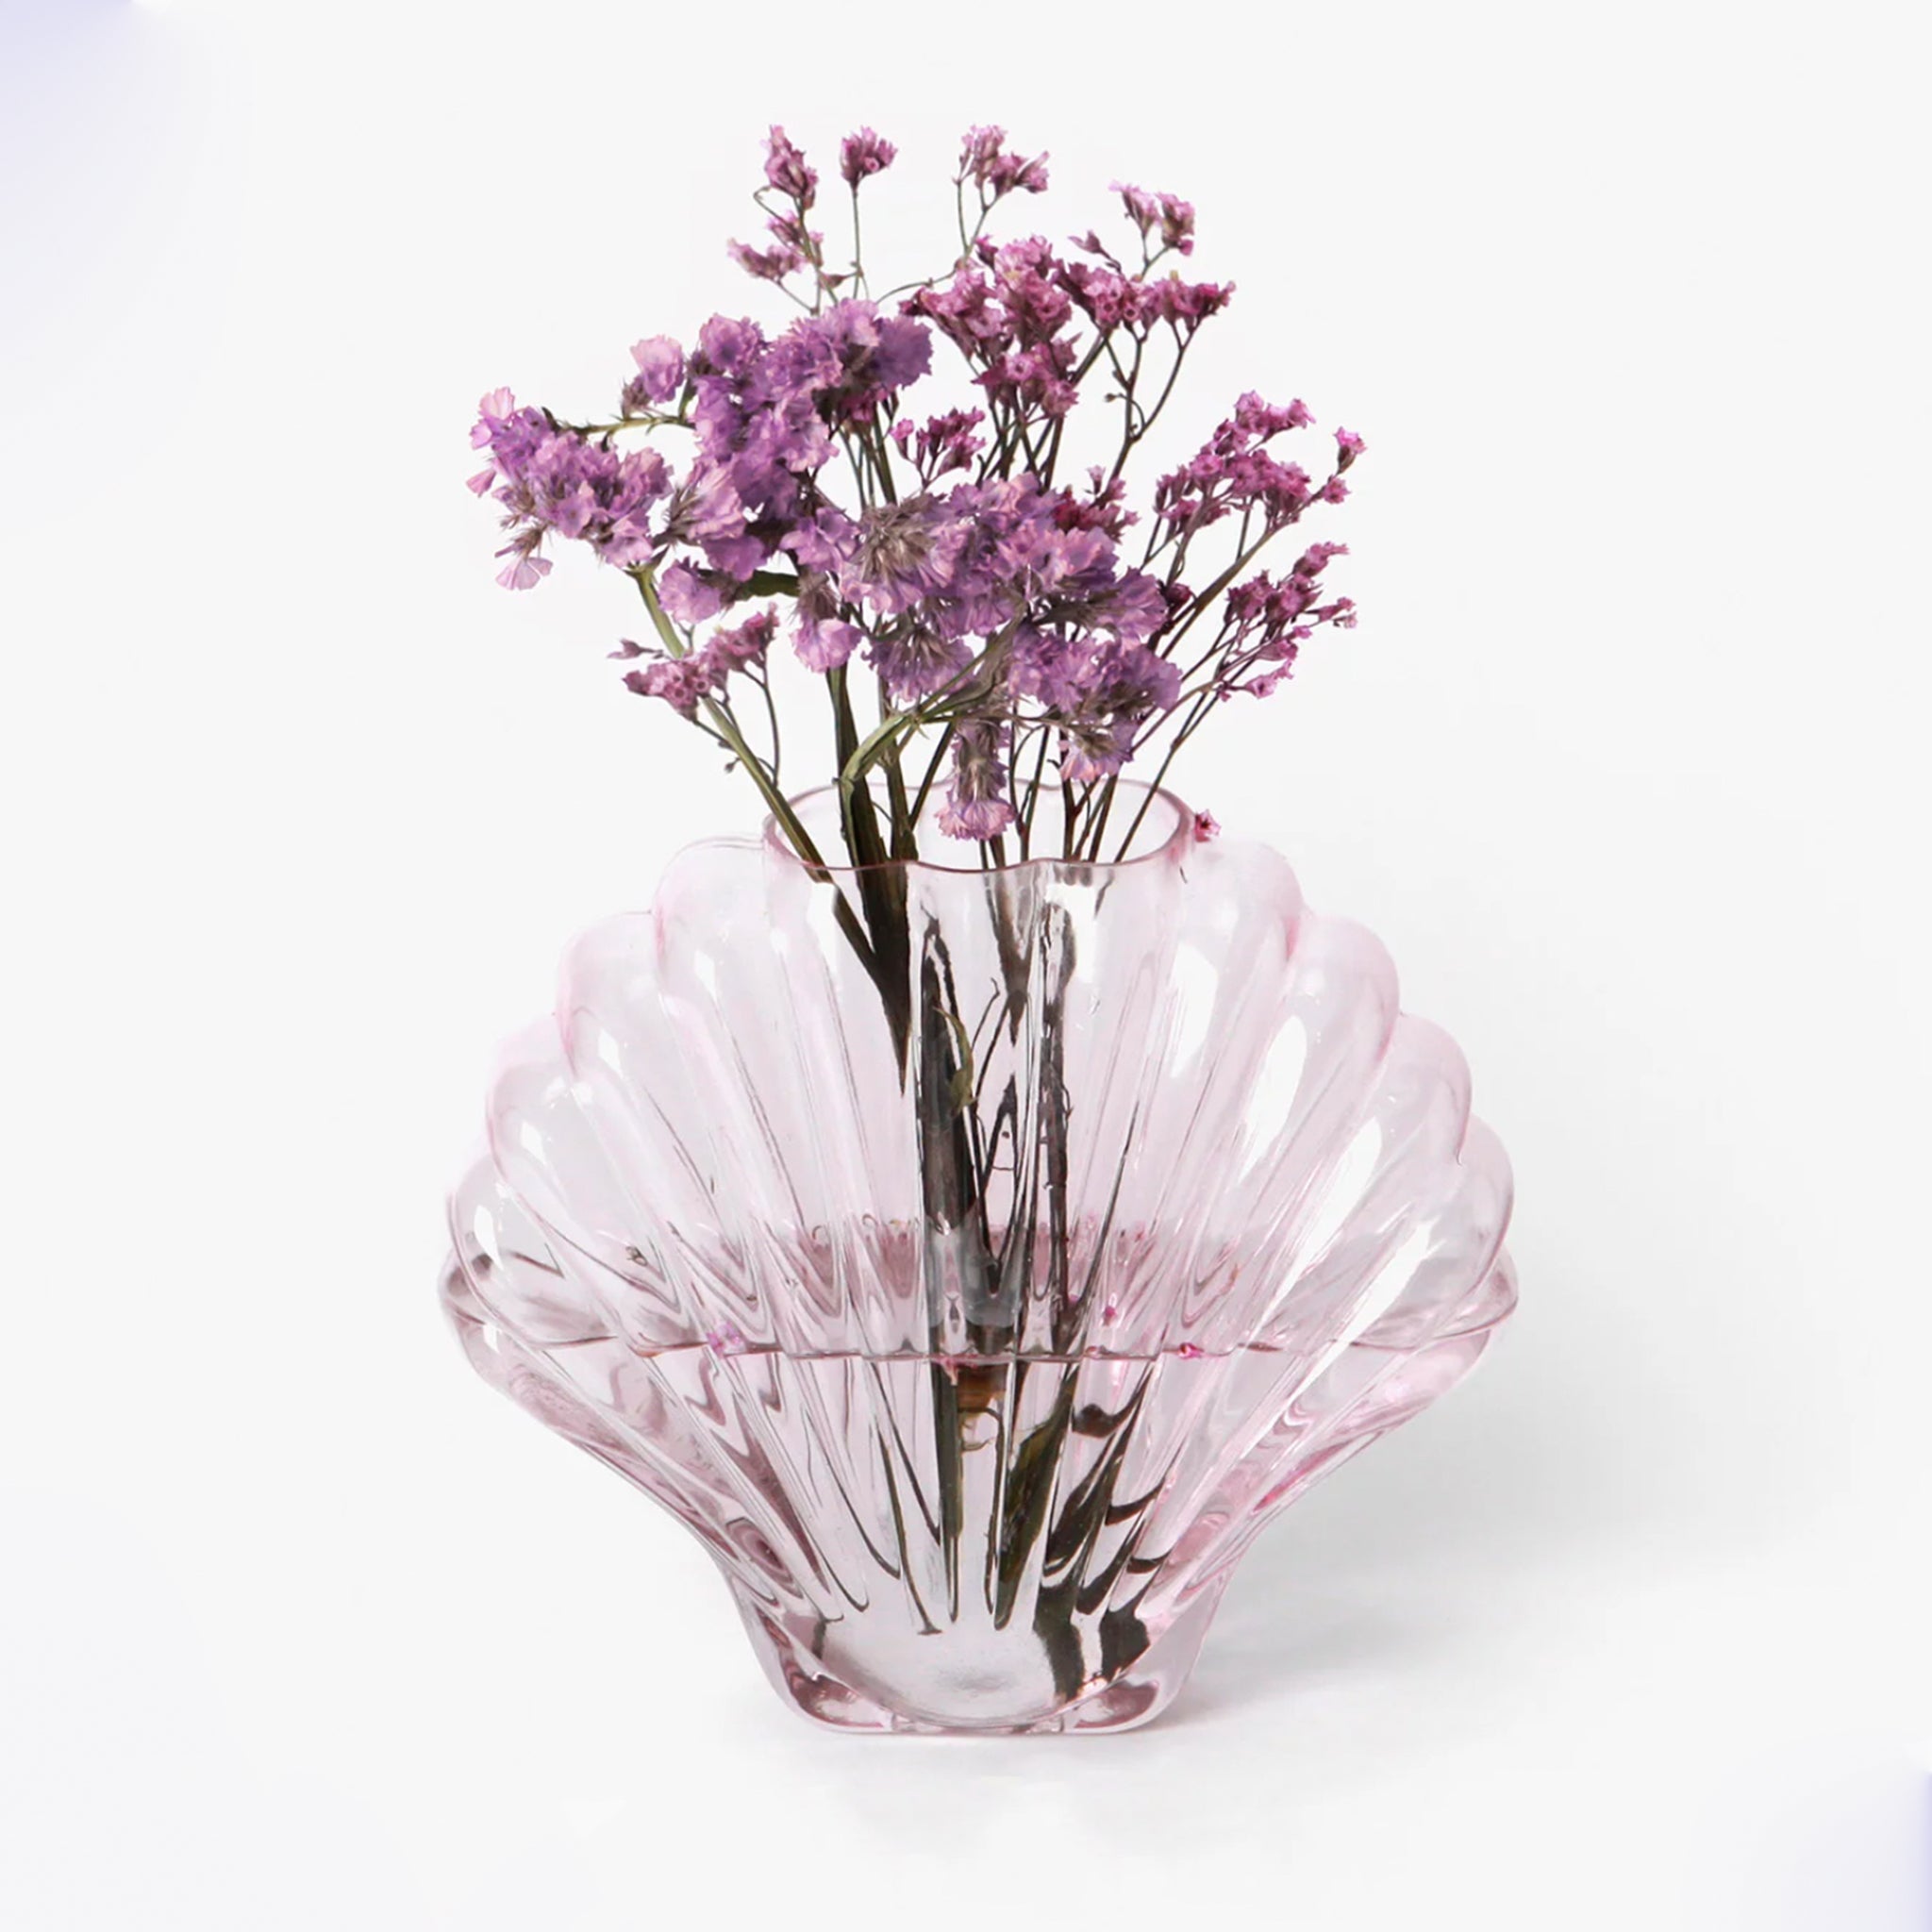 On a white background is a light pink glass, shell shaped vase.